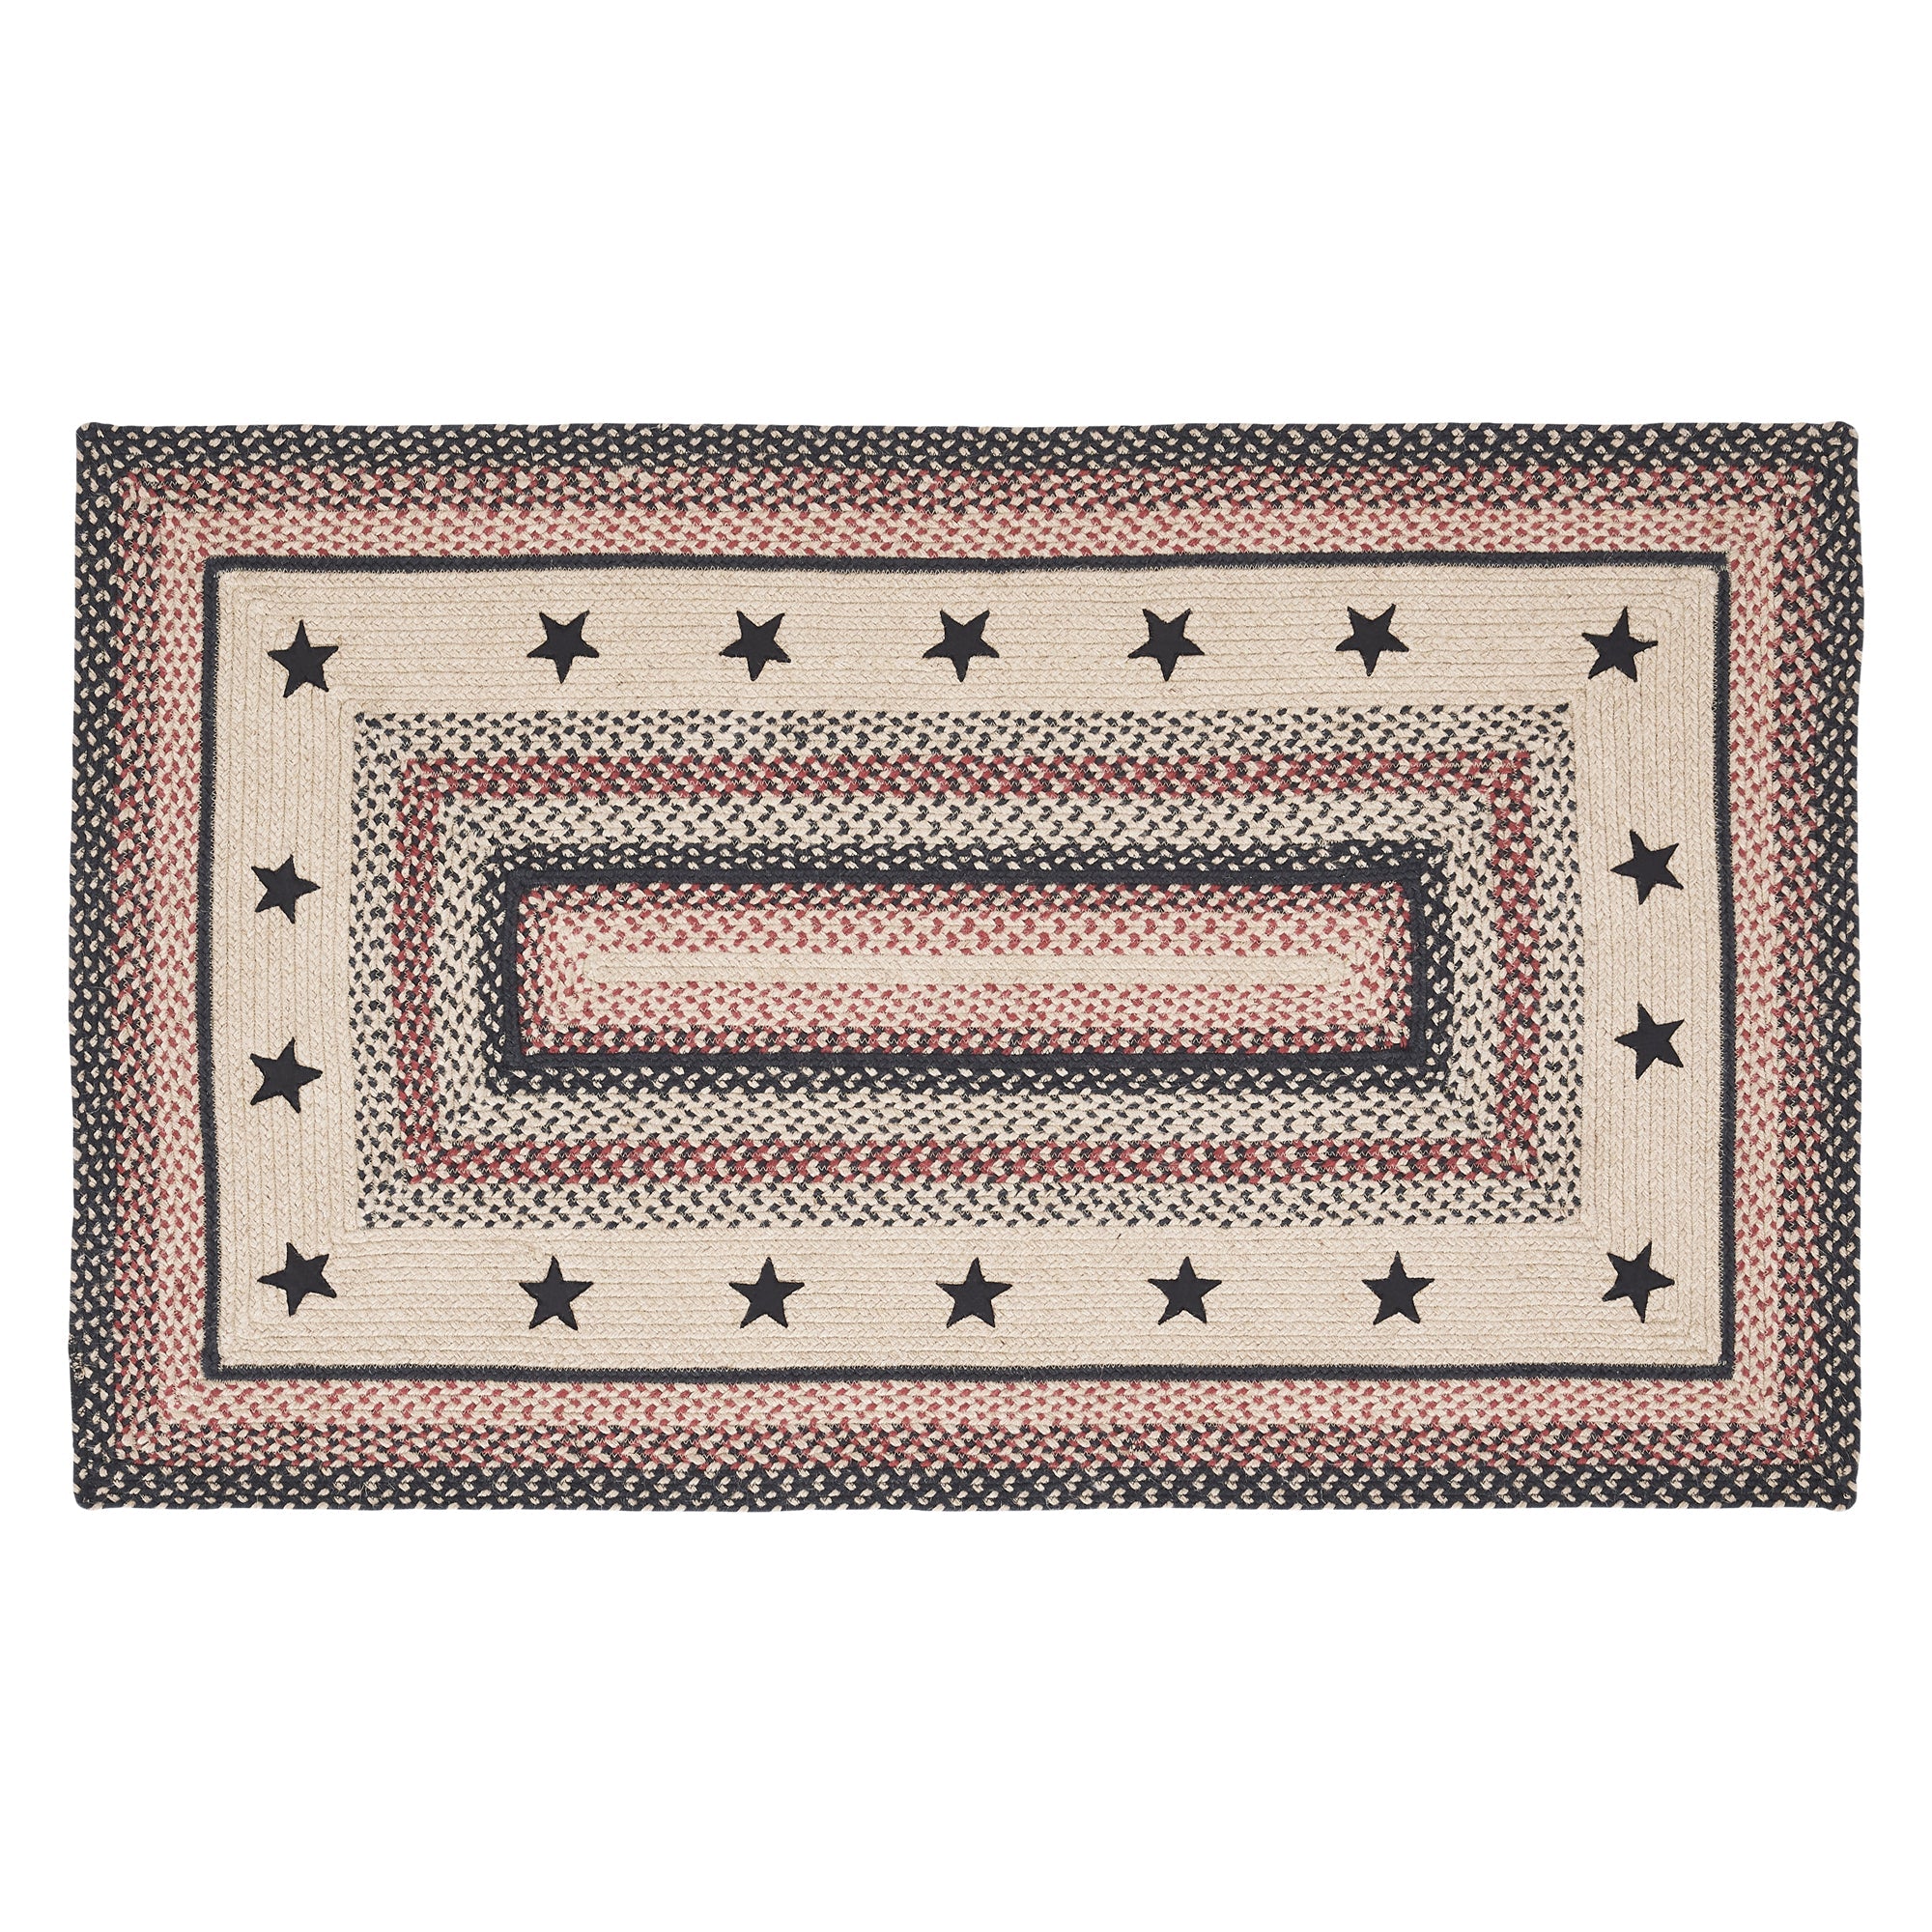 Colonial Star Jute Braided Rug Rect. with Rug Pad 3'x5' VHC Brands